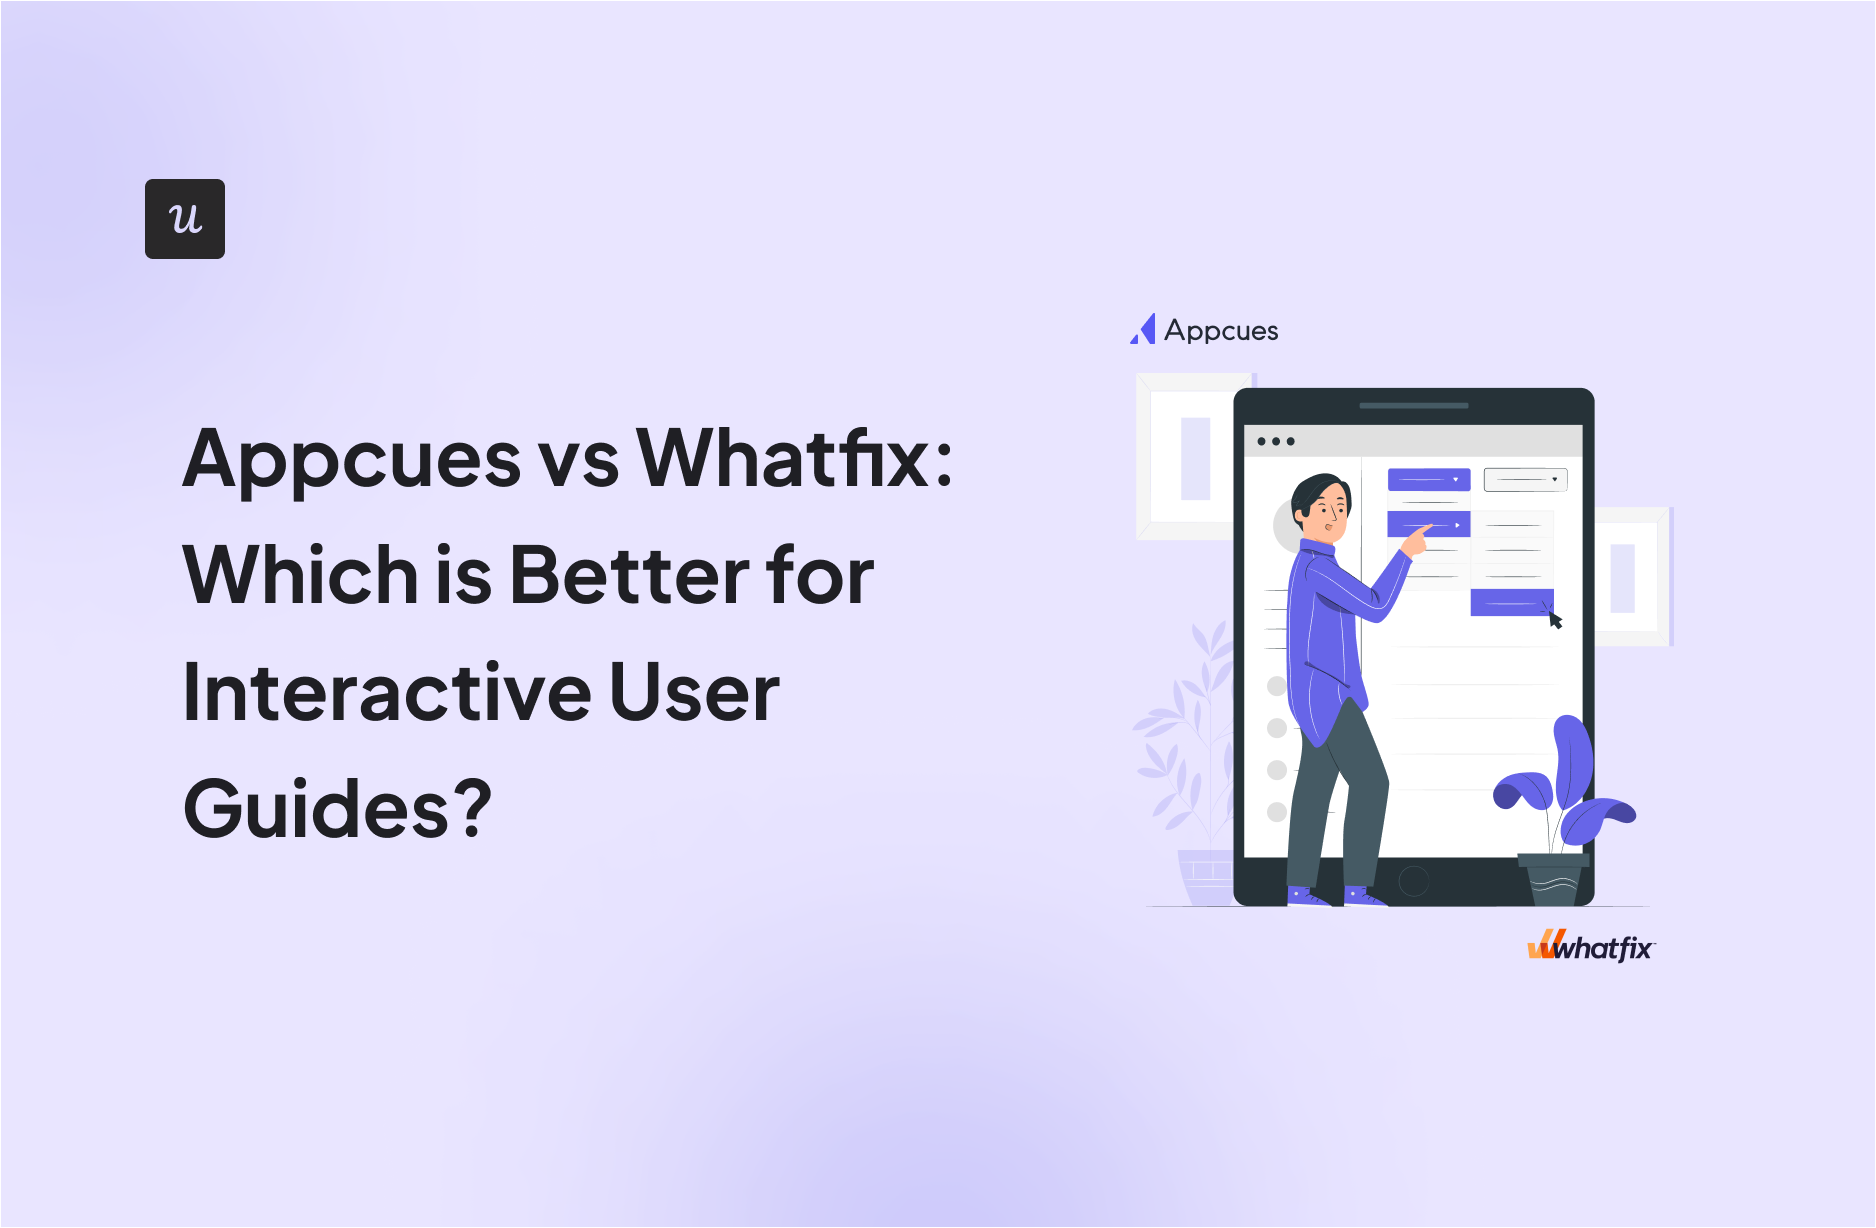 Appcues vs Whatfix: Which is Better for Interactive User Guides?